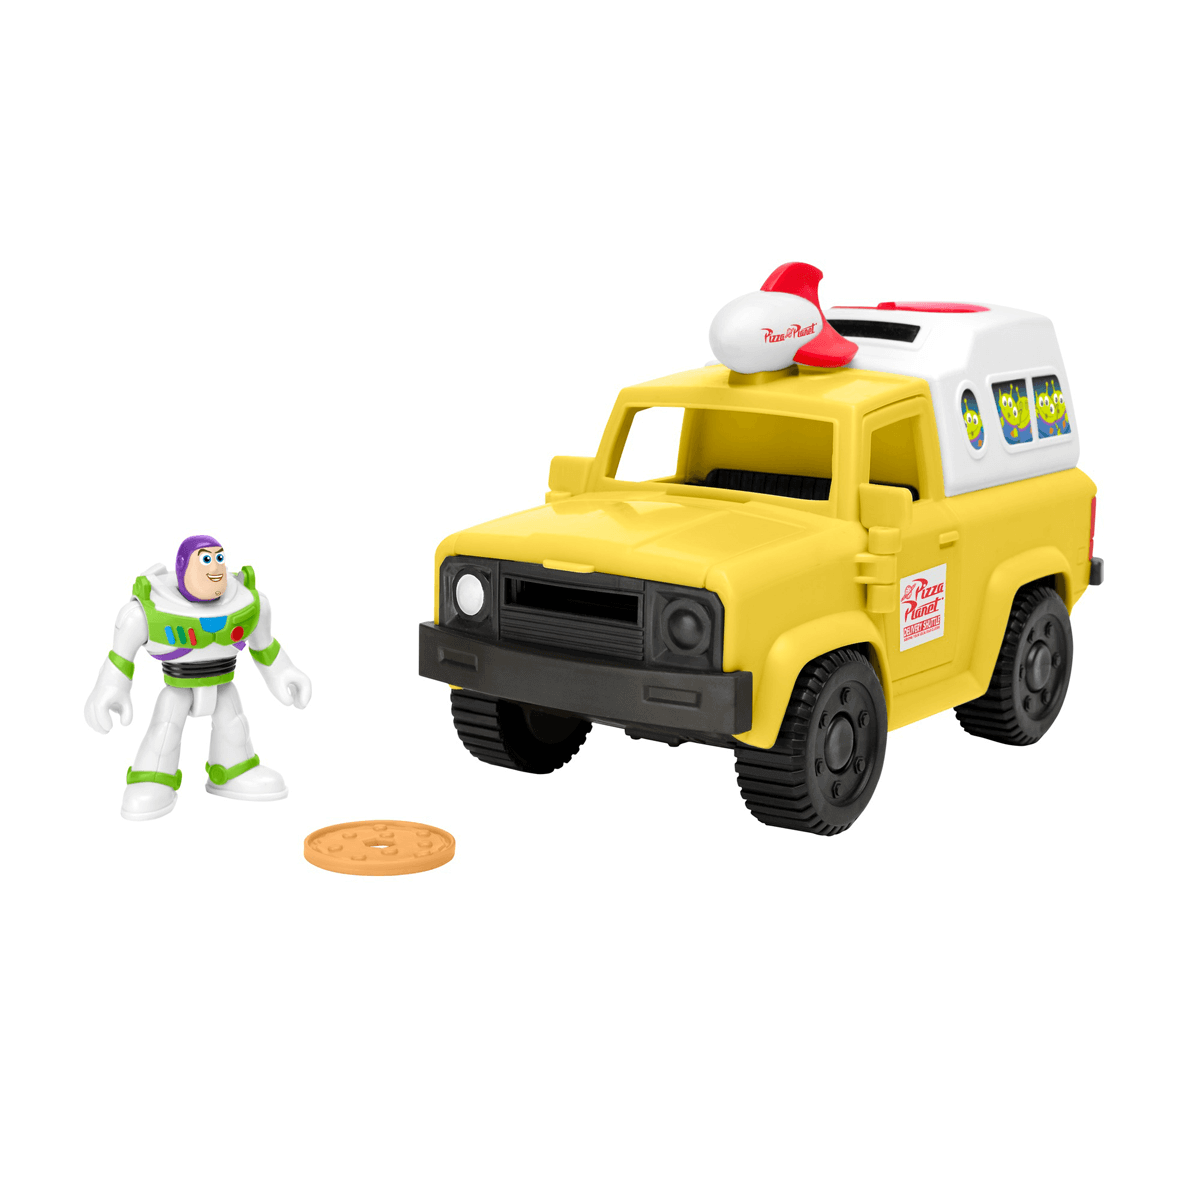 Toy Story Imaginext Toy Story Buzz Lightyear e Pizza Planet Truck NUOVO 